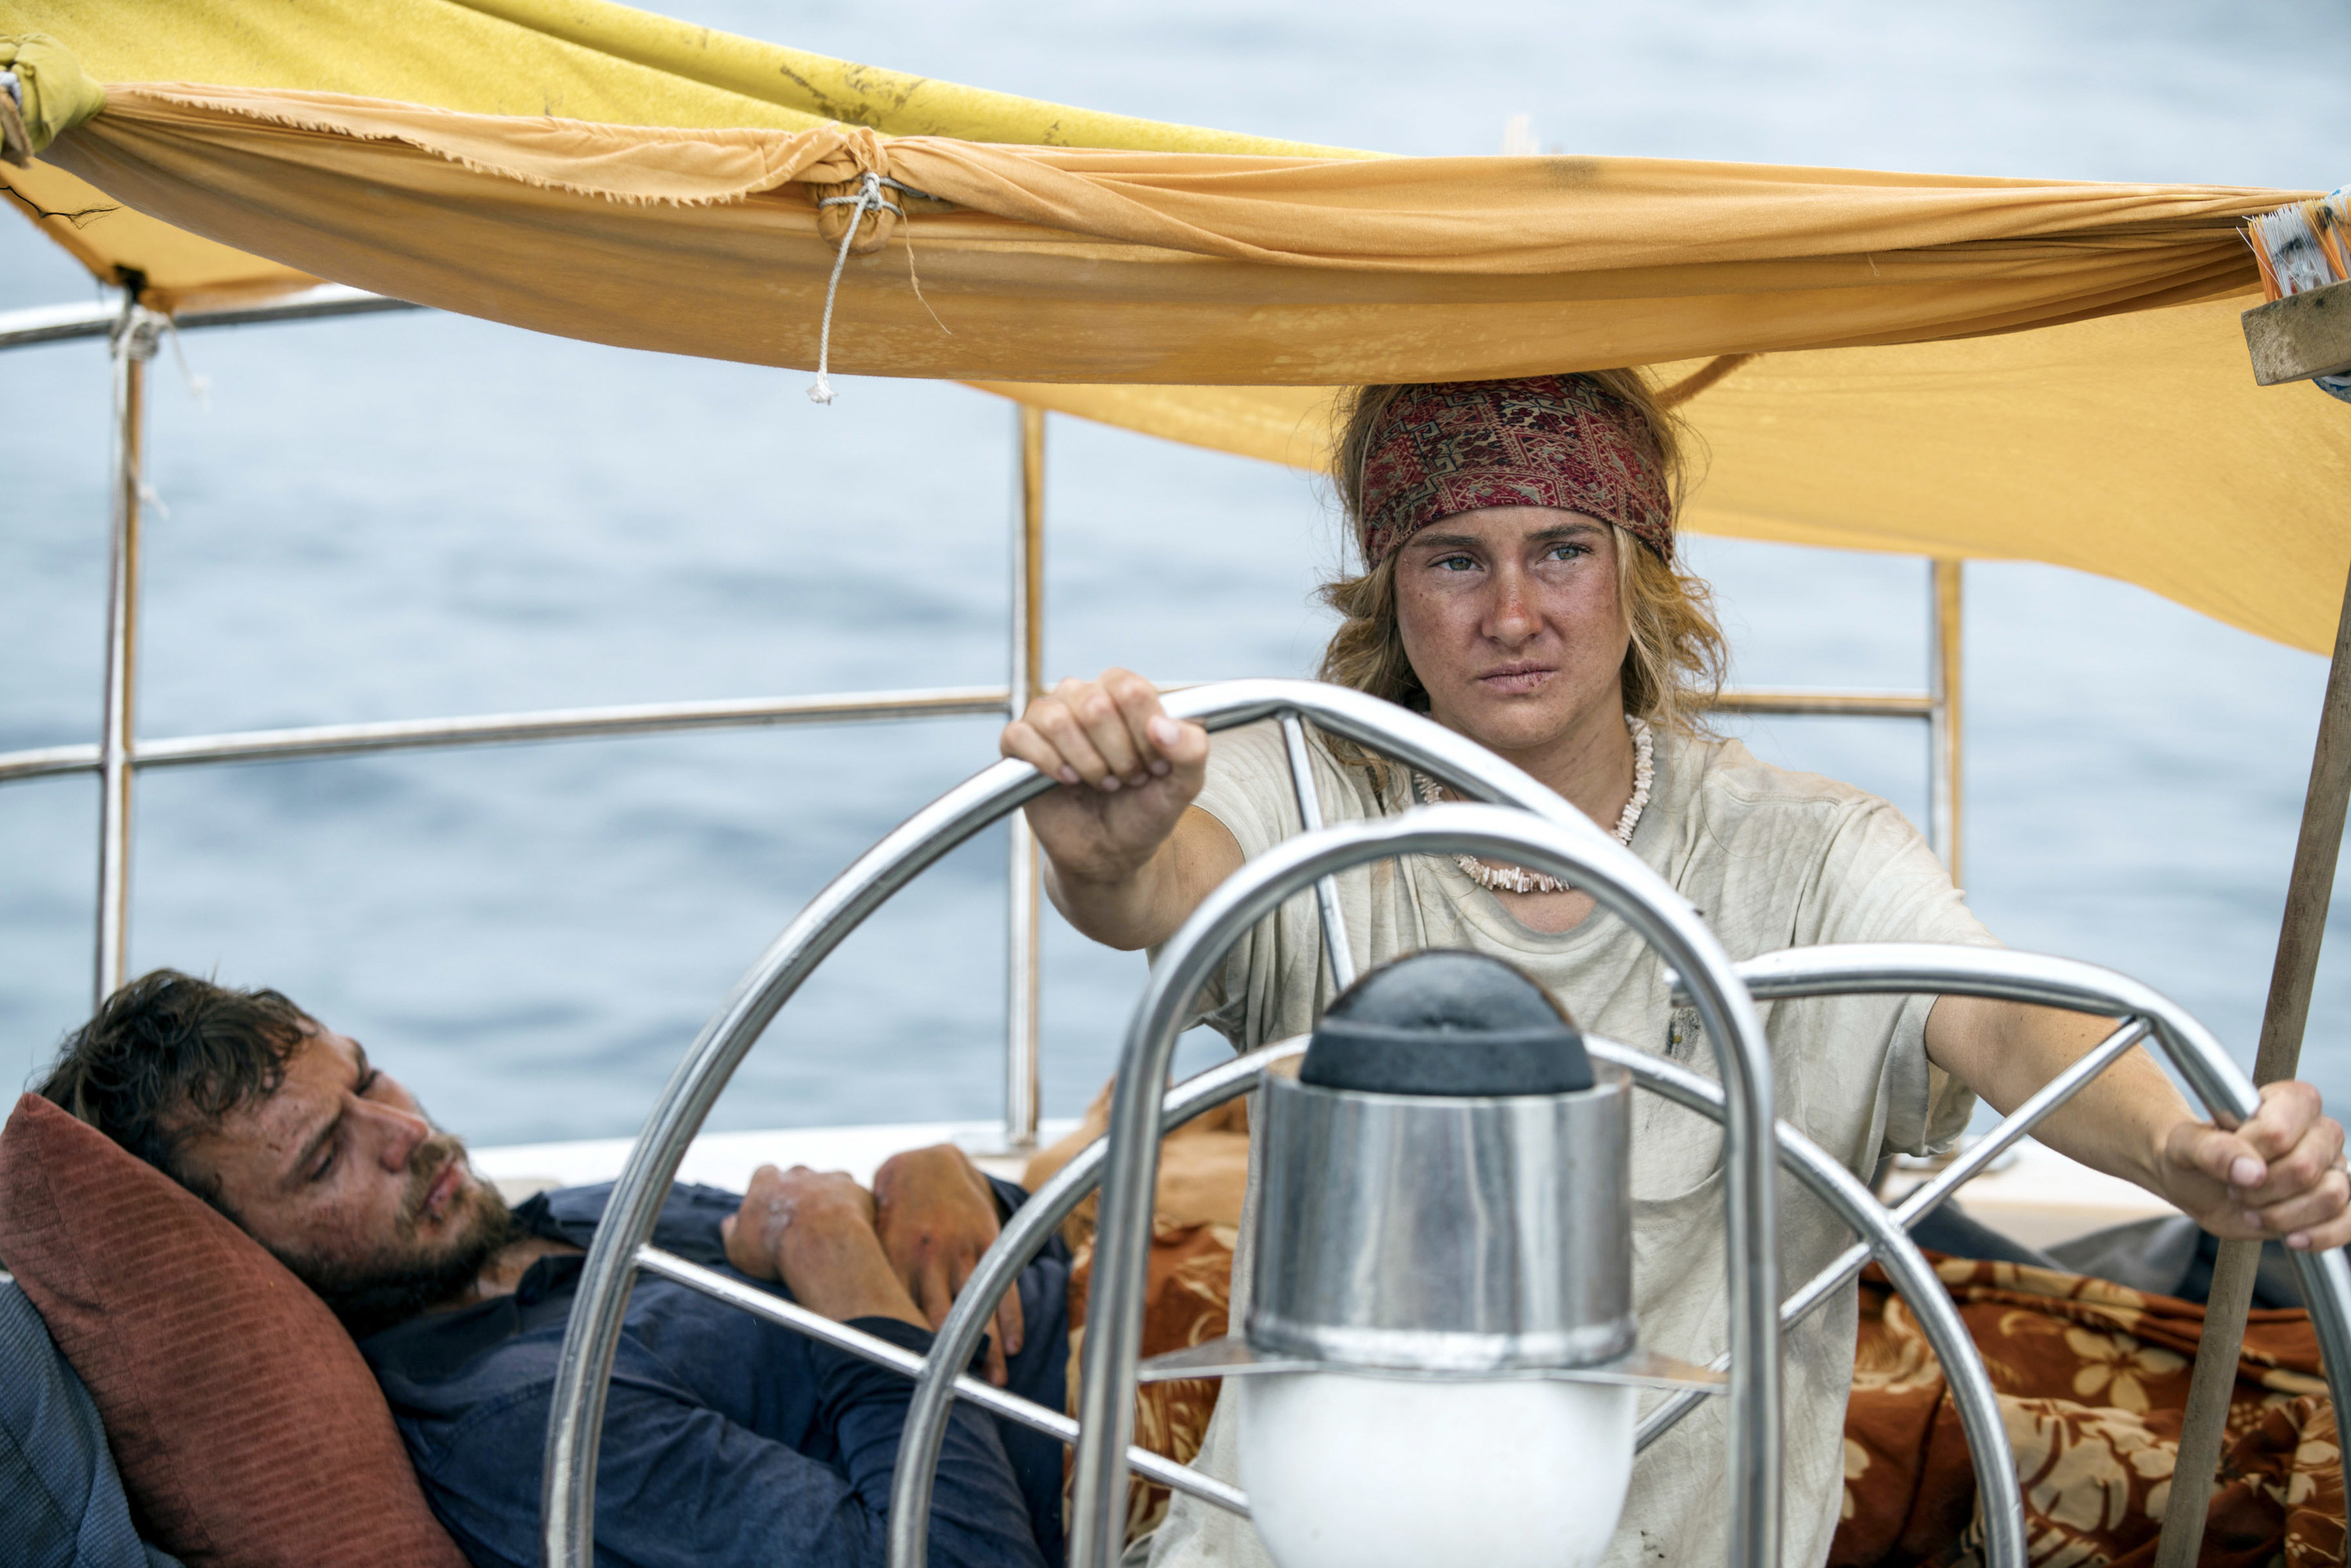 shailene and sam claflin on the boat in the film